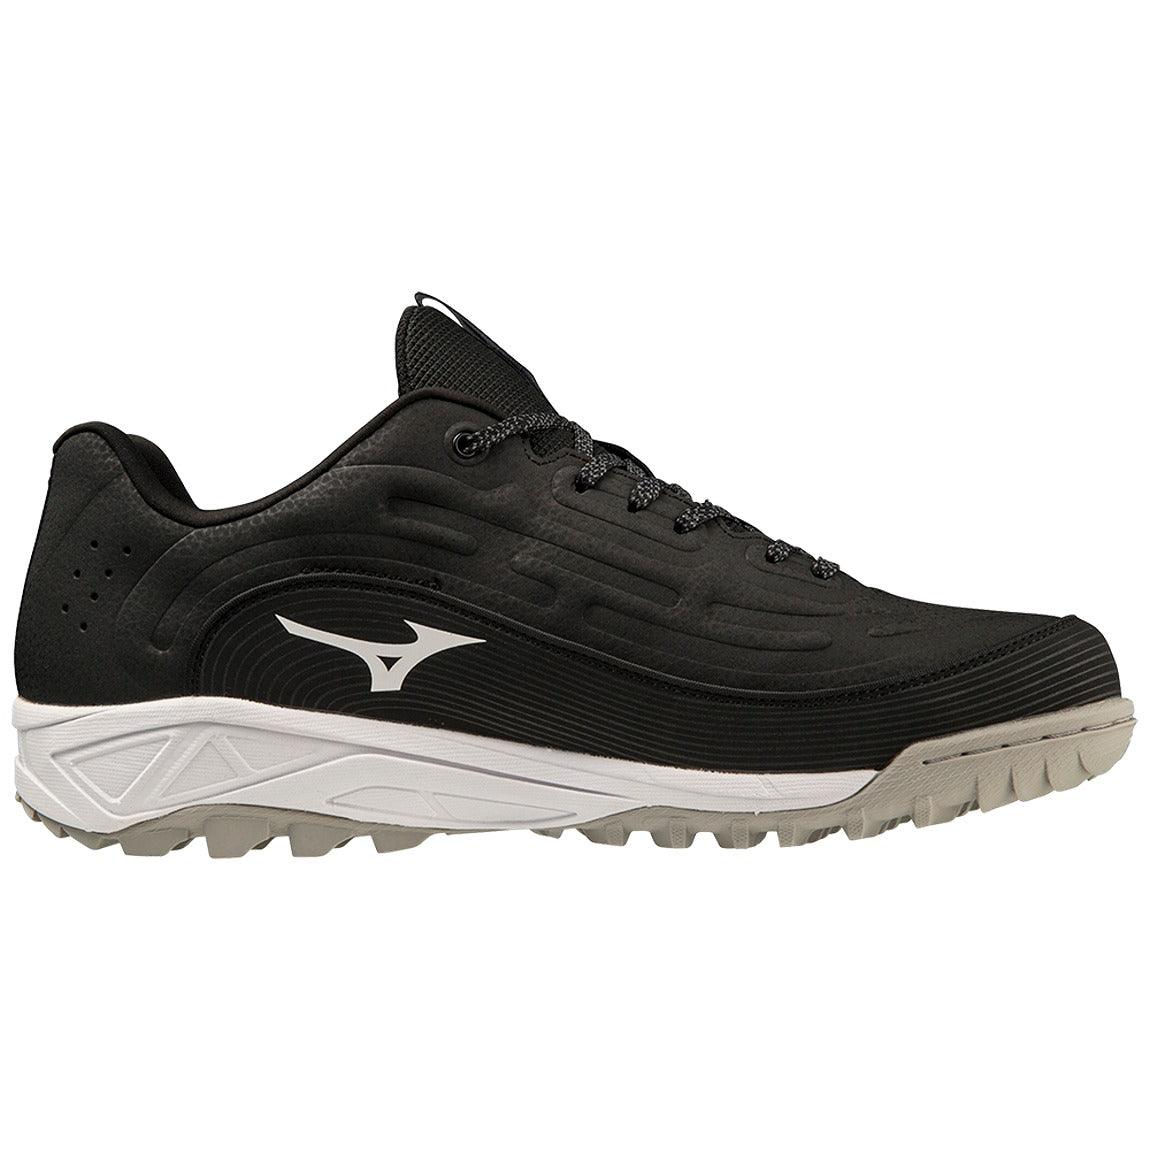 Mizuno Ambition 3 BB Low All Surface Shoe